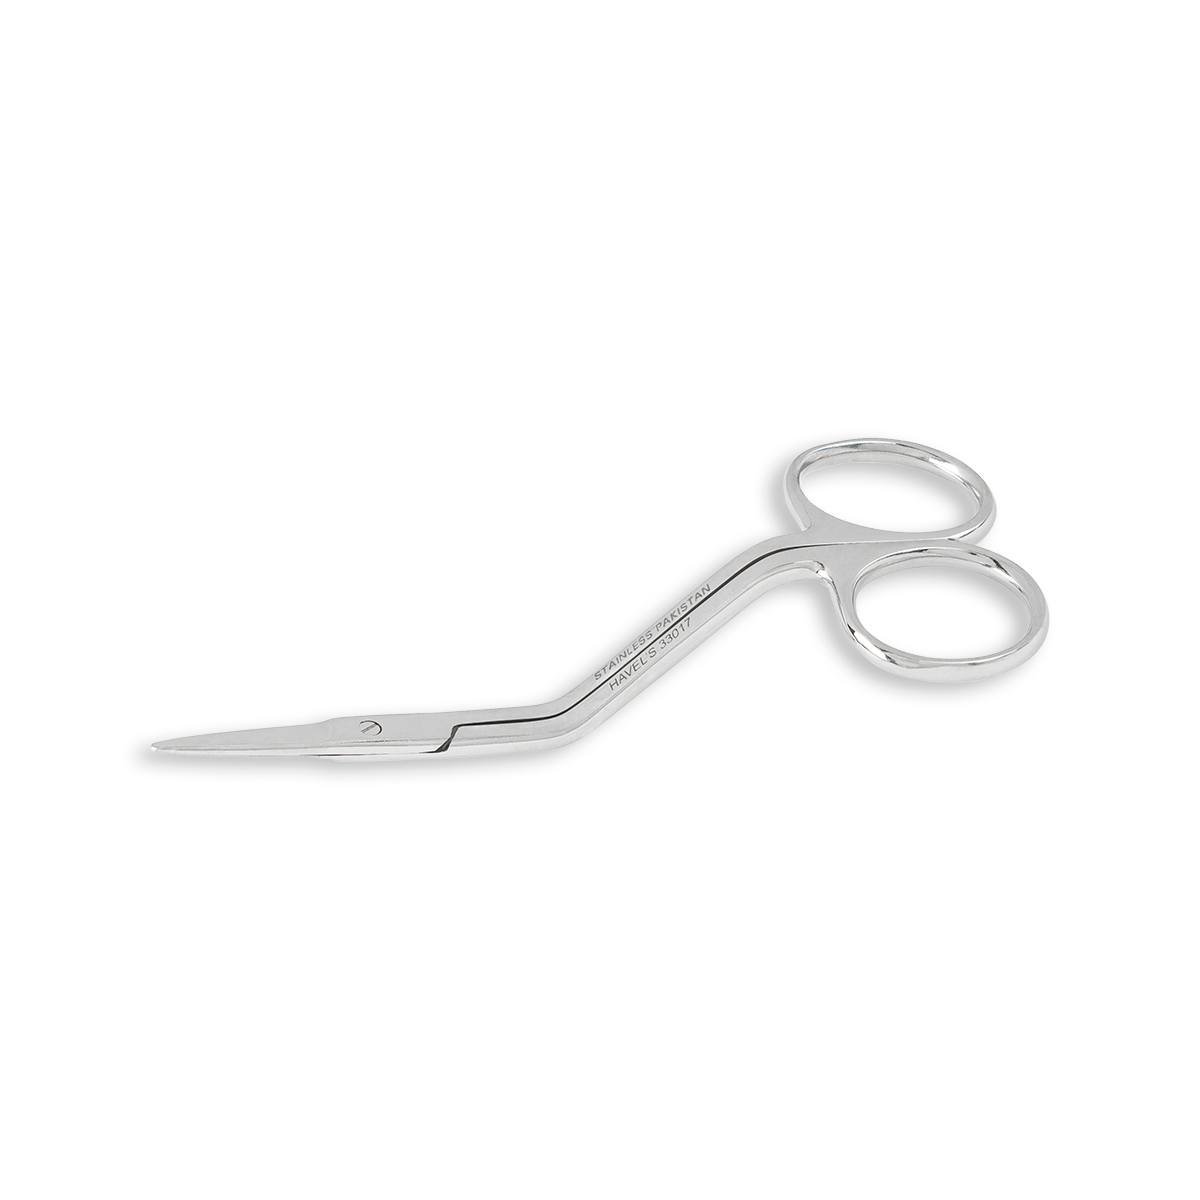 Havel's Sewing- 3 1/2 Double Curved Pointed Tip Embroidery